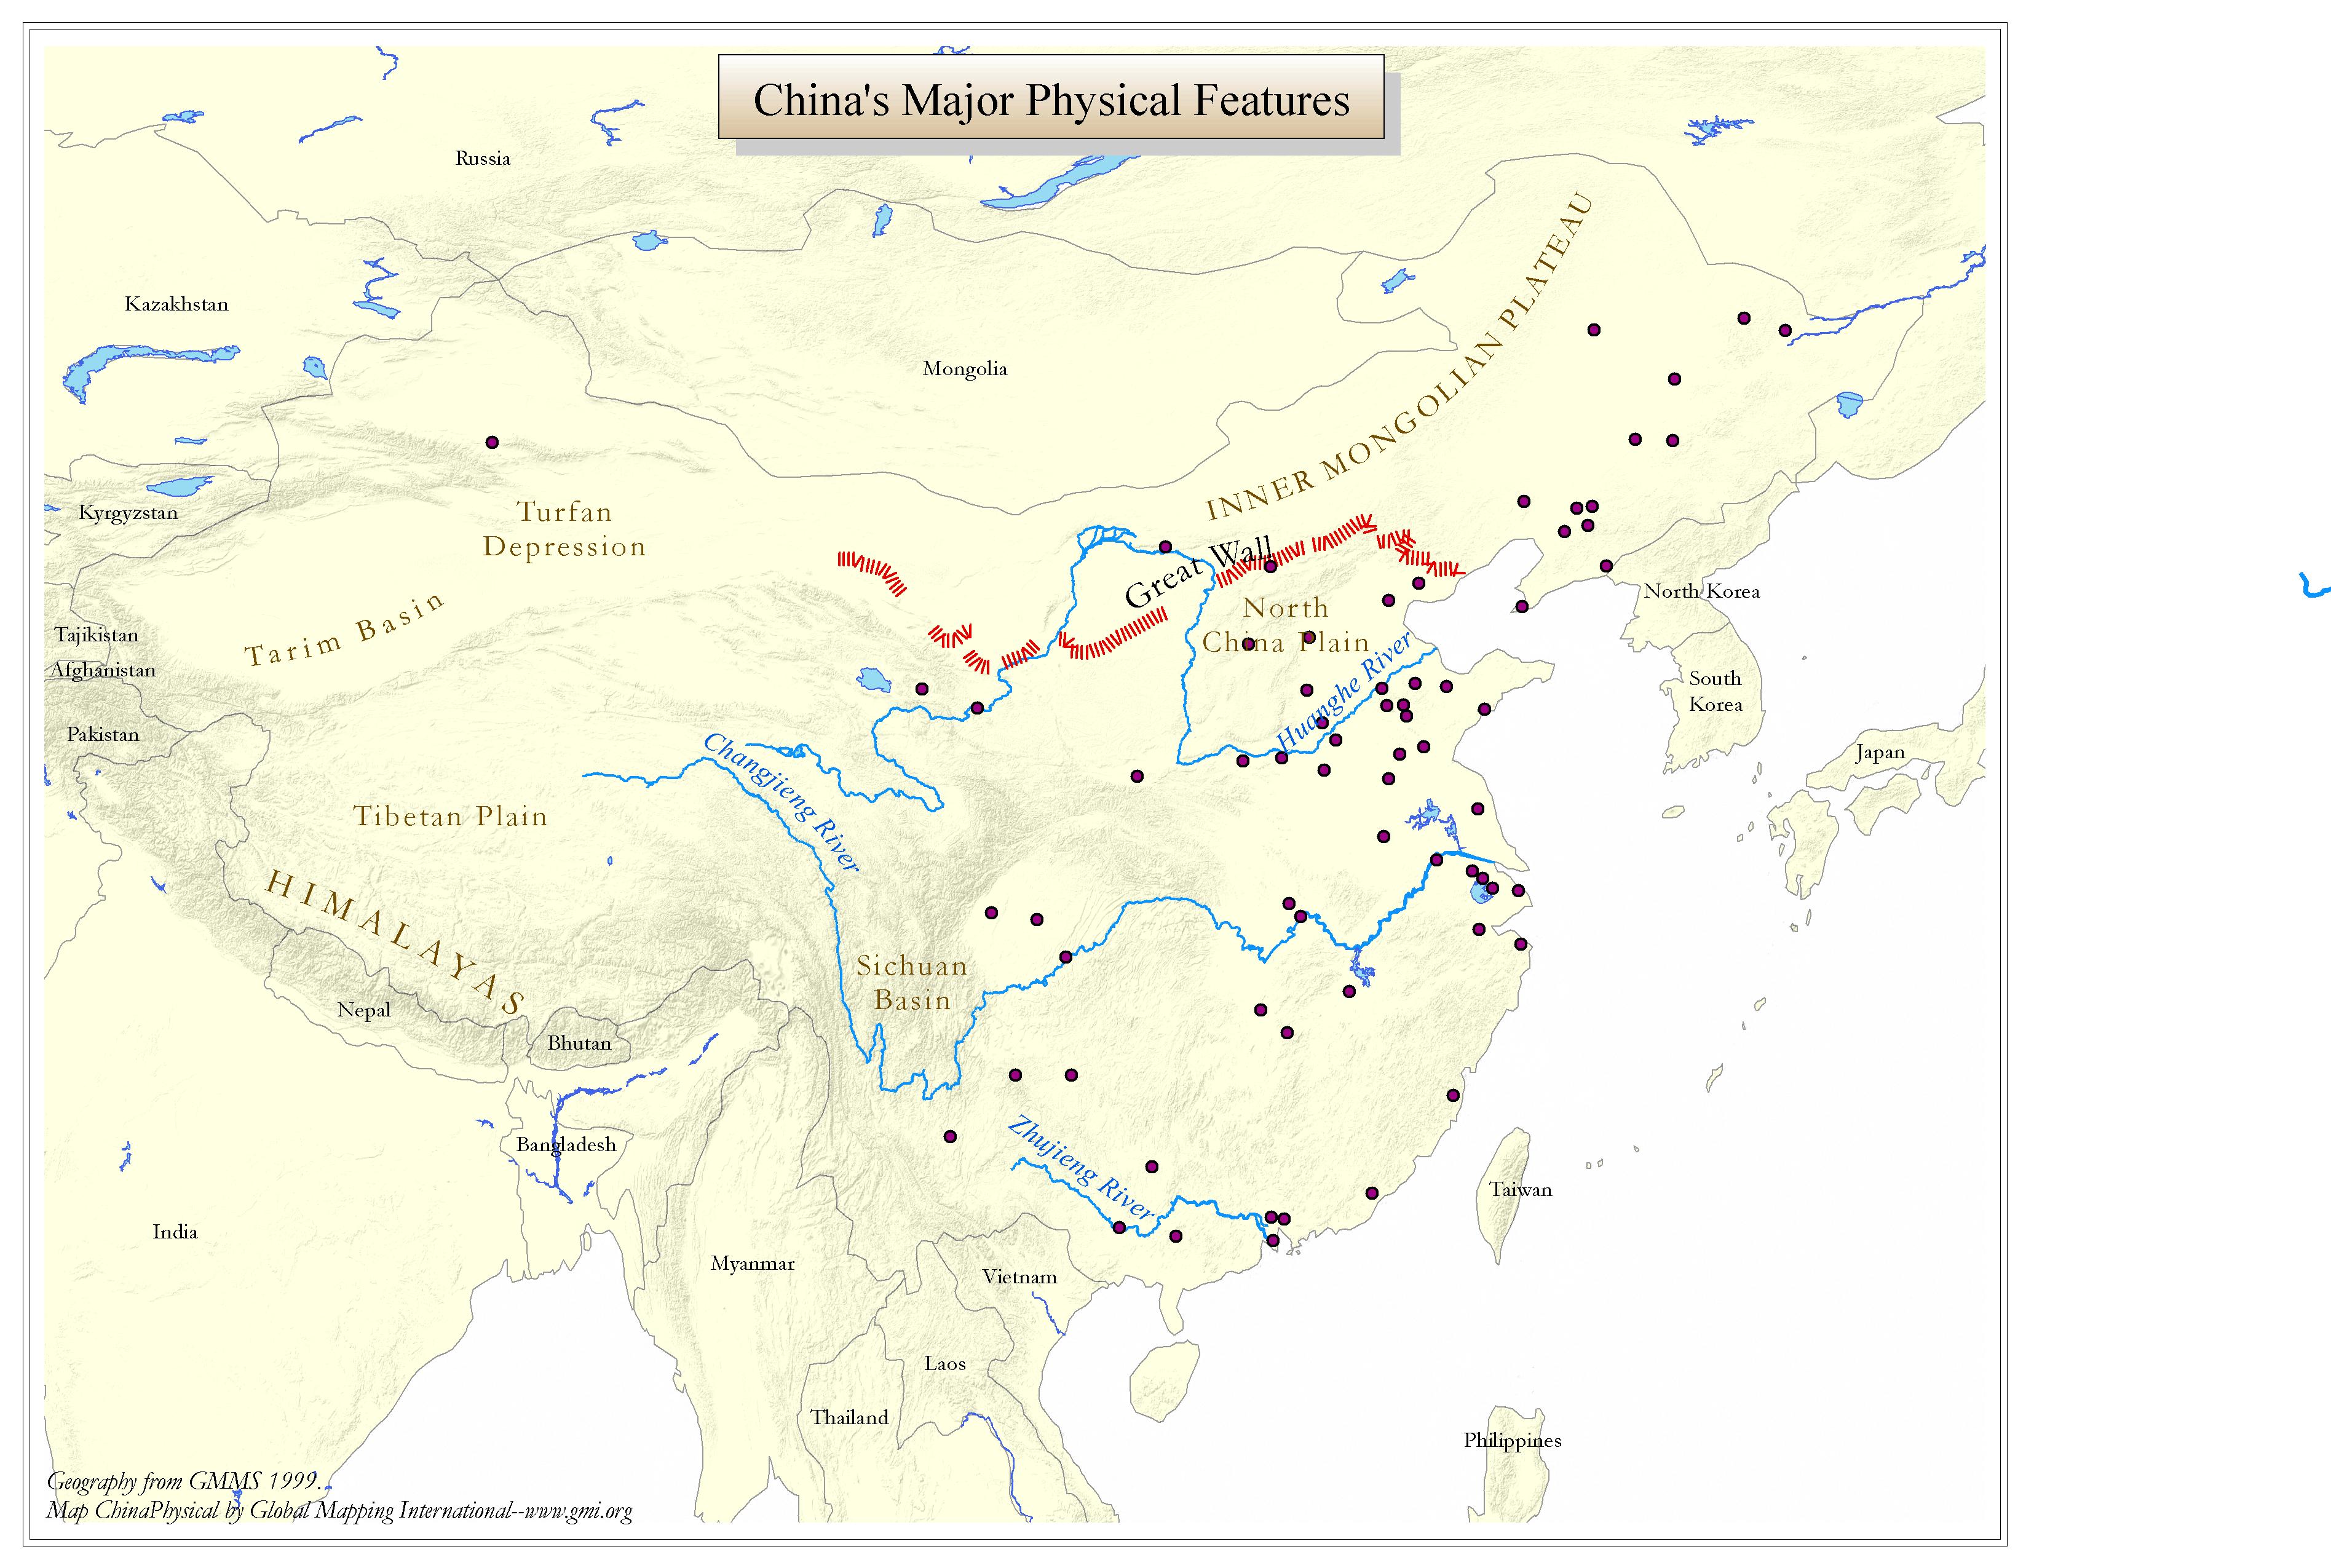 China's Major Physical Features